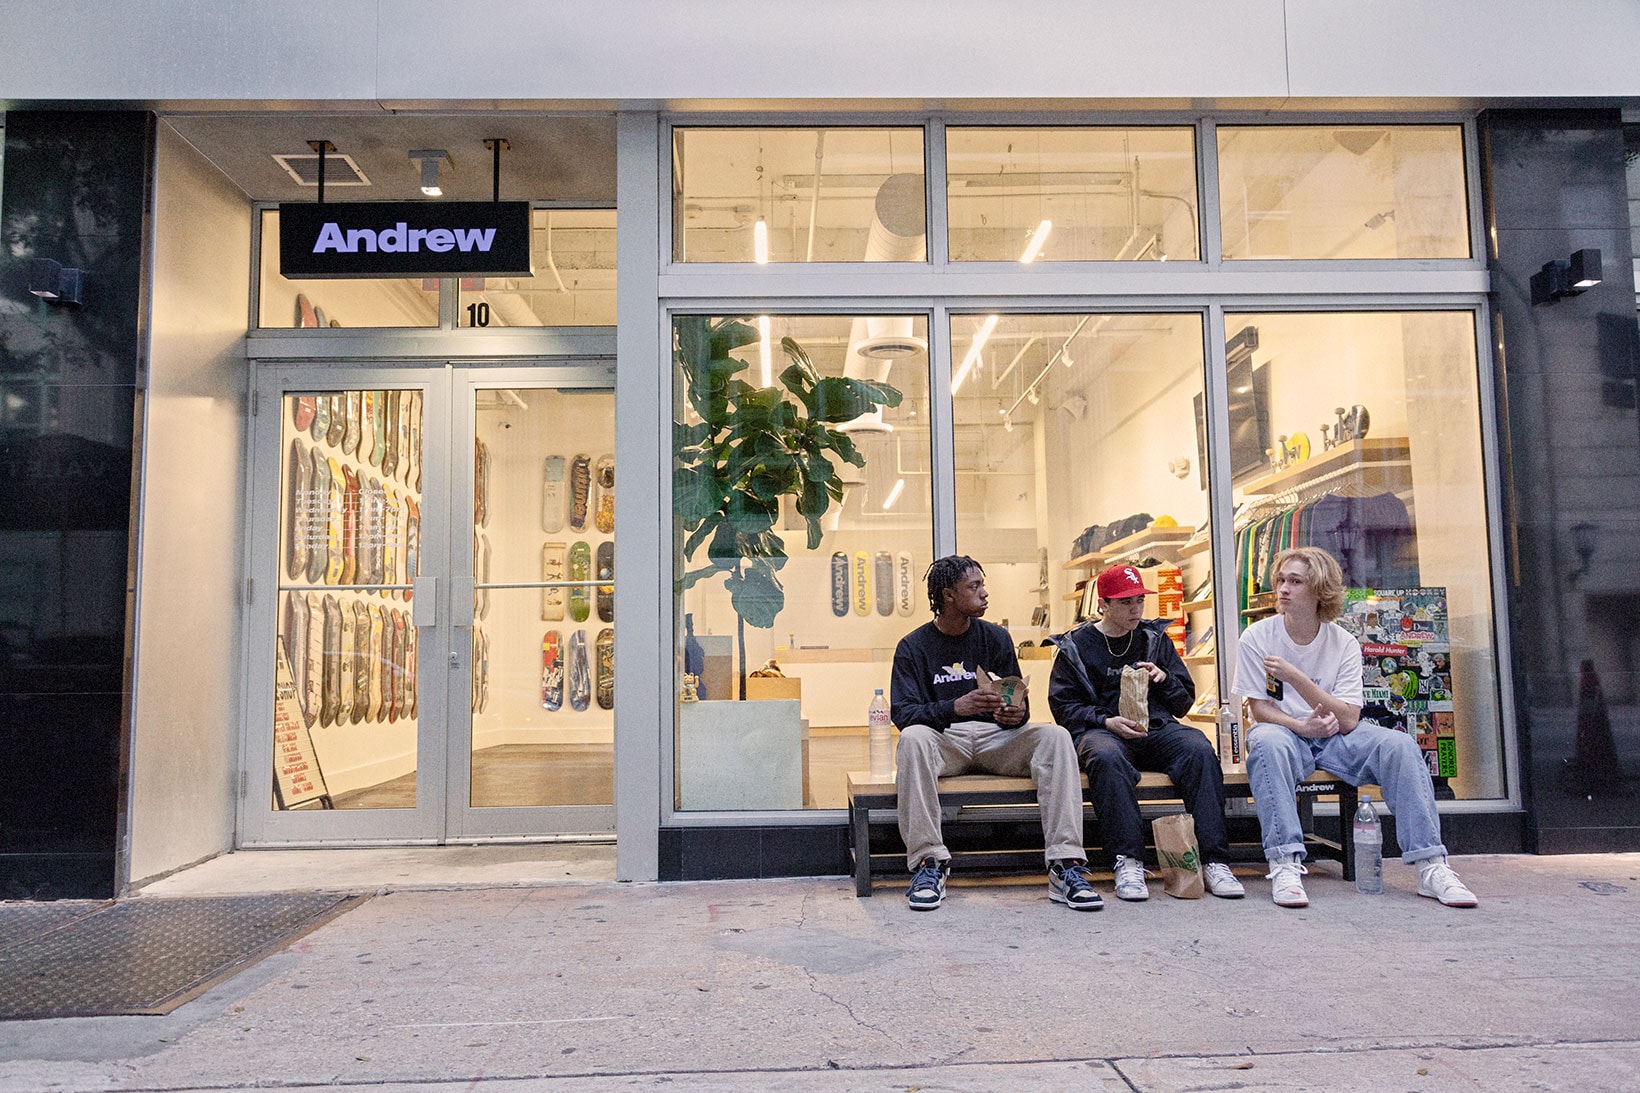 How This Shop Is Driving Miami’s Skate Culture Forward Virgil Abloh Angelo Baque AWAKE Andrew Downtown AllTimers Versailles Cafe Miami Art Basel 